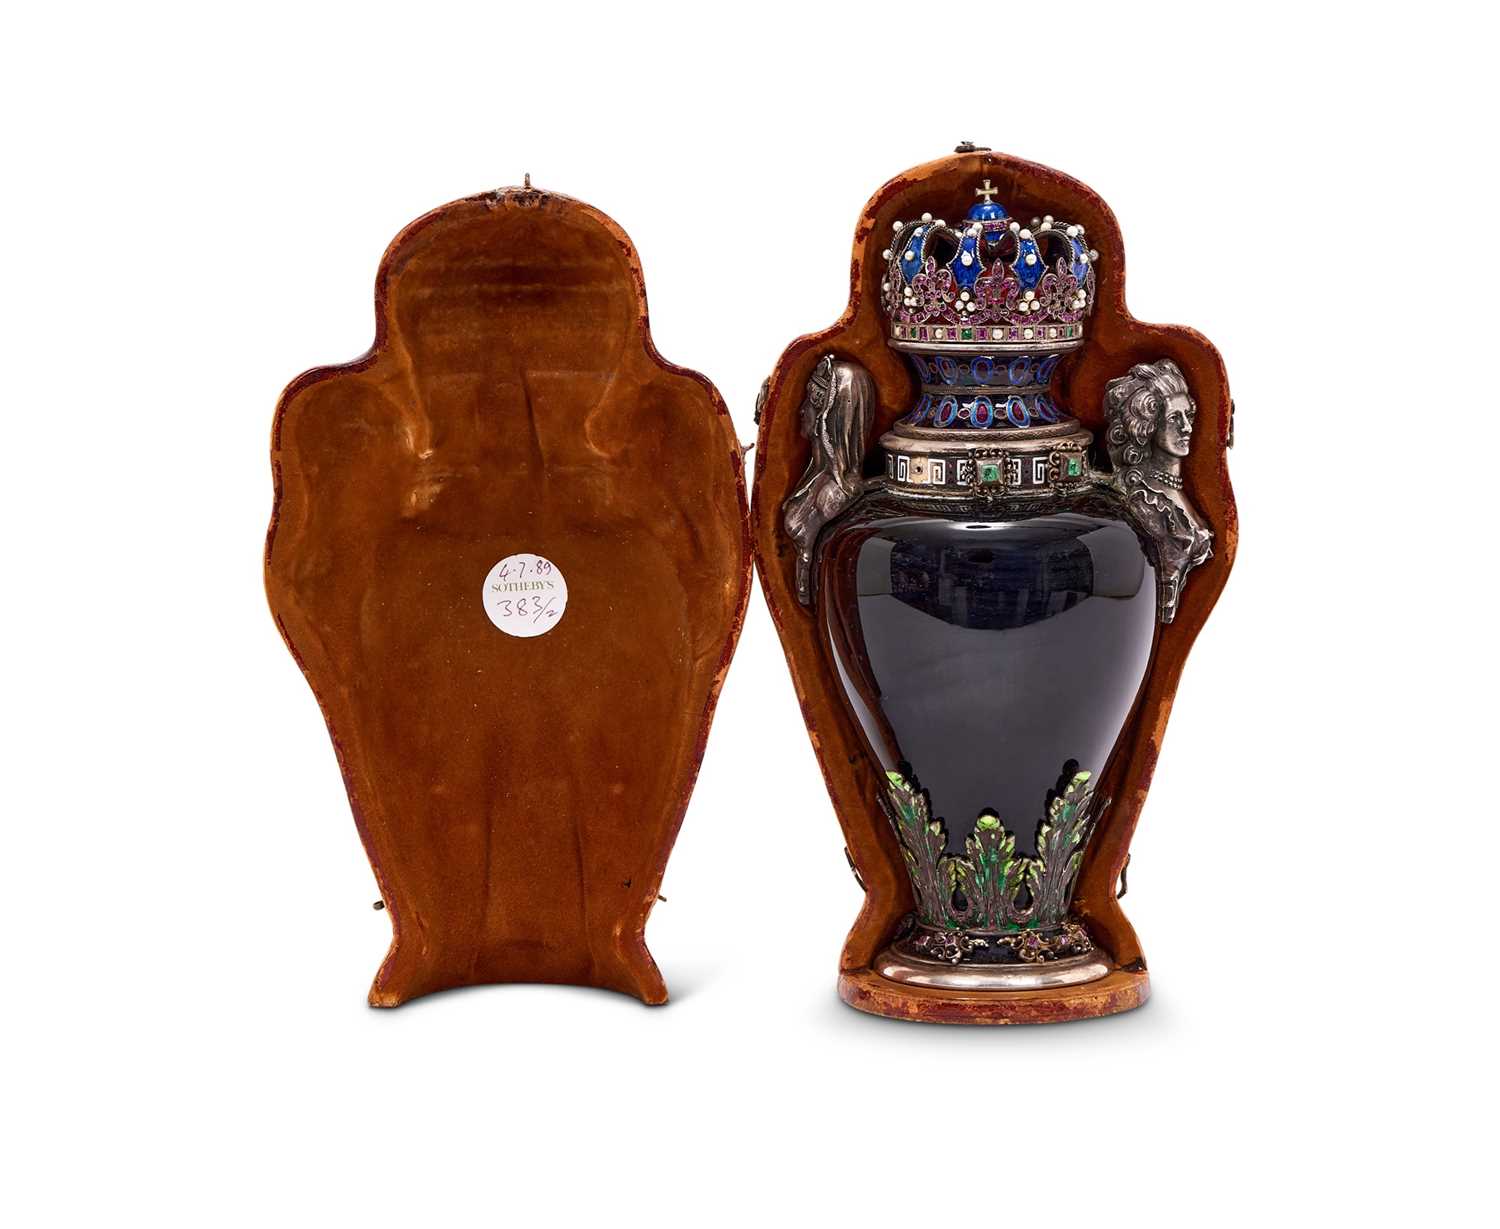 A FINE 19TH CENTURY VIENNESE ENAMEL, SILVER AND JEWELLED URN AND COVER OF ROYAL THEME - Image 9 of 12